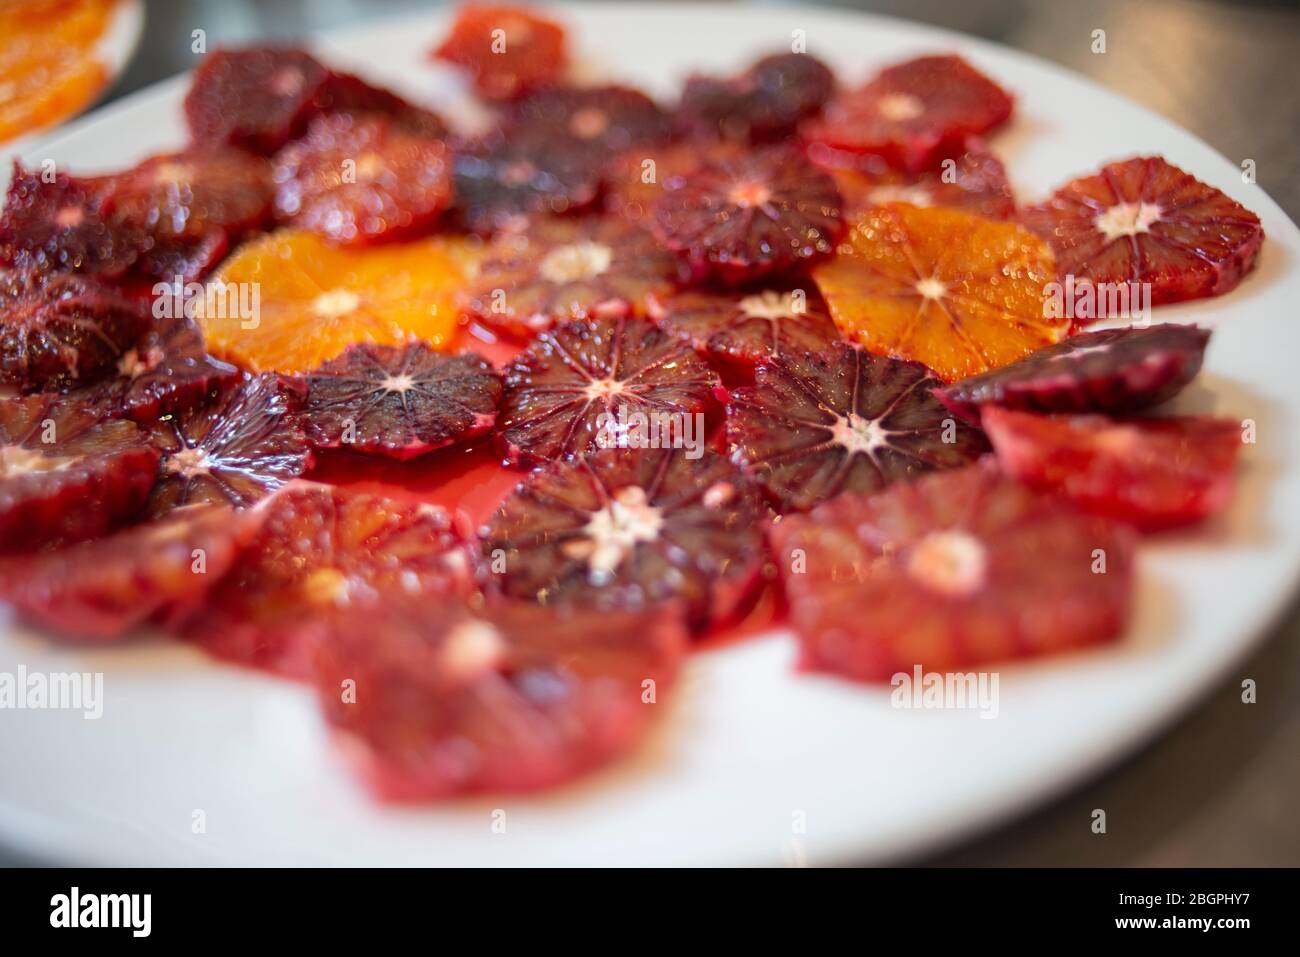 A large white plate covered in slices of blood oranges Stock Photo